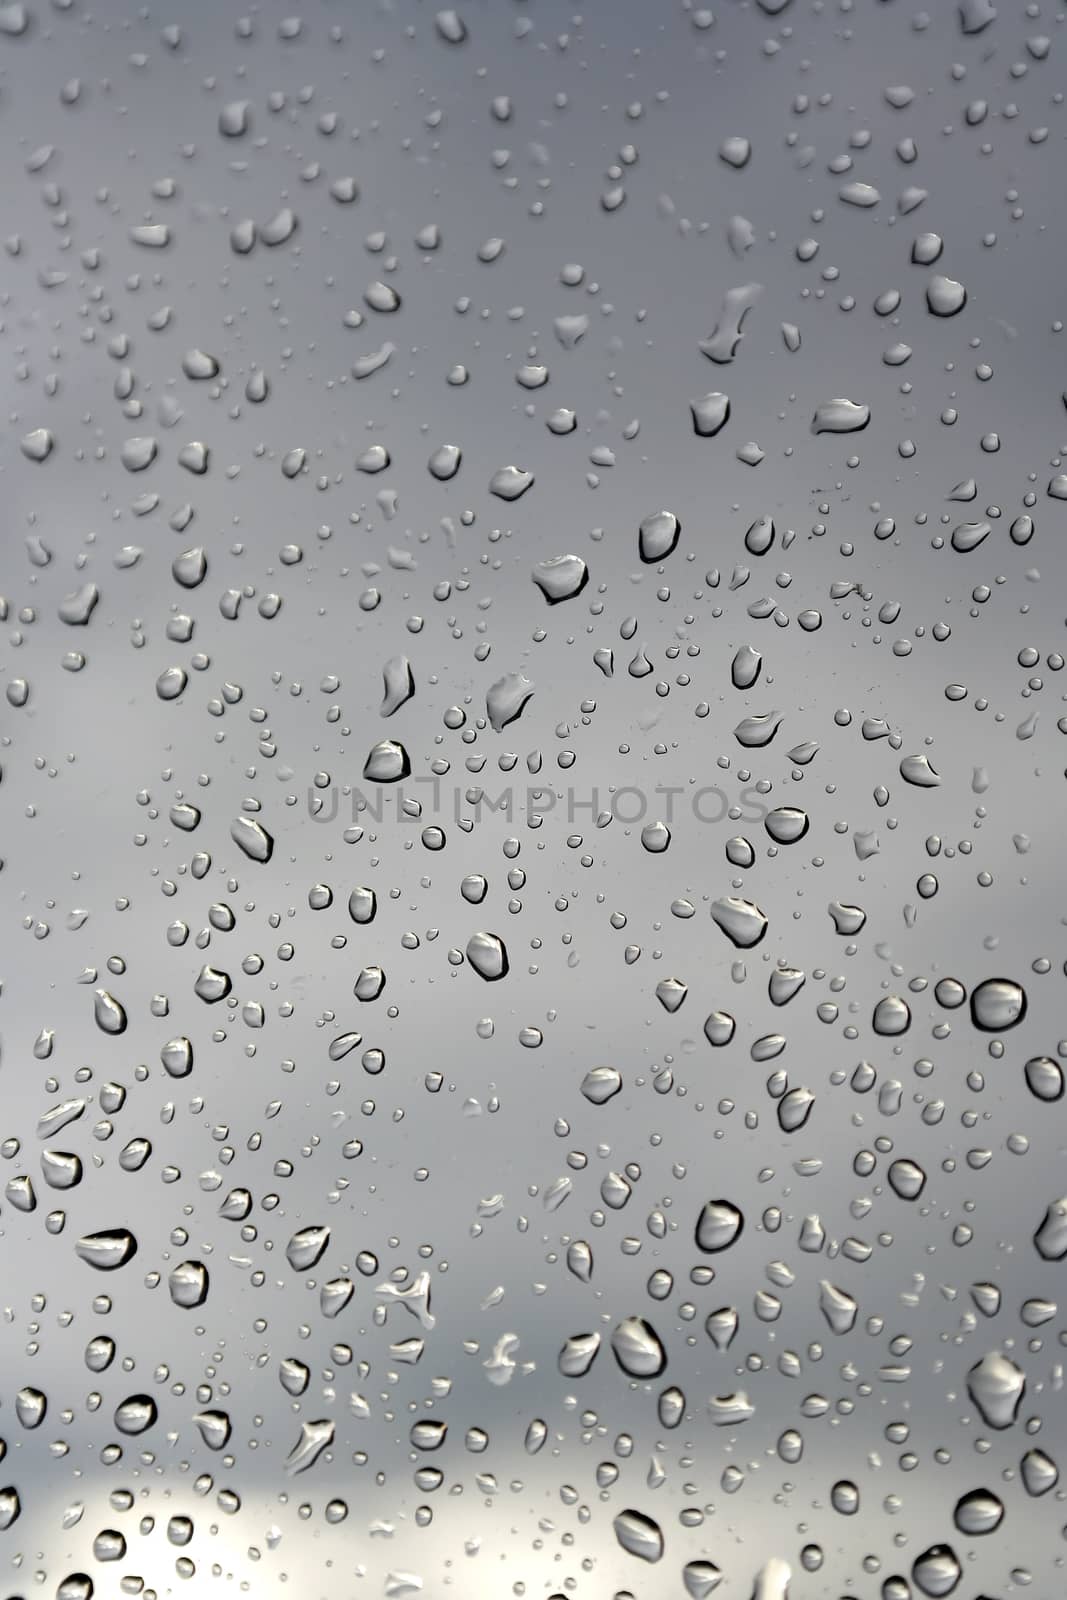 Water drops on a window glass, rainy day by sergpet